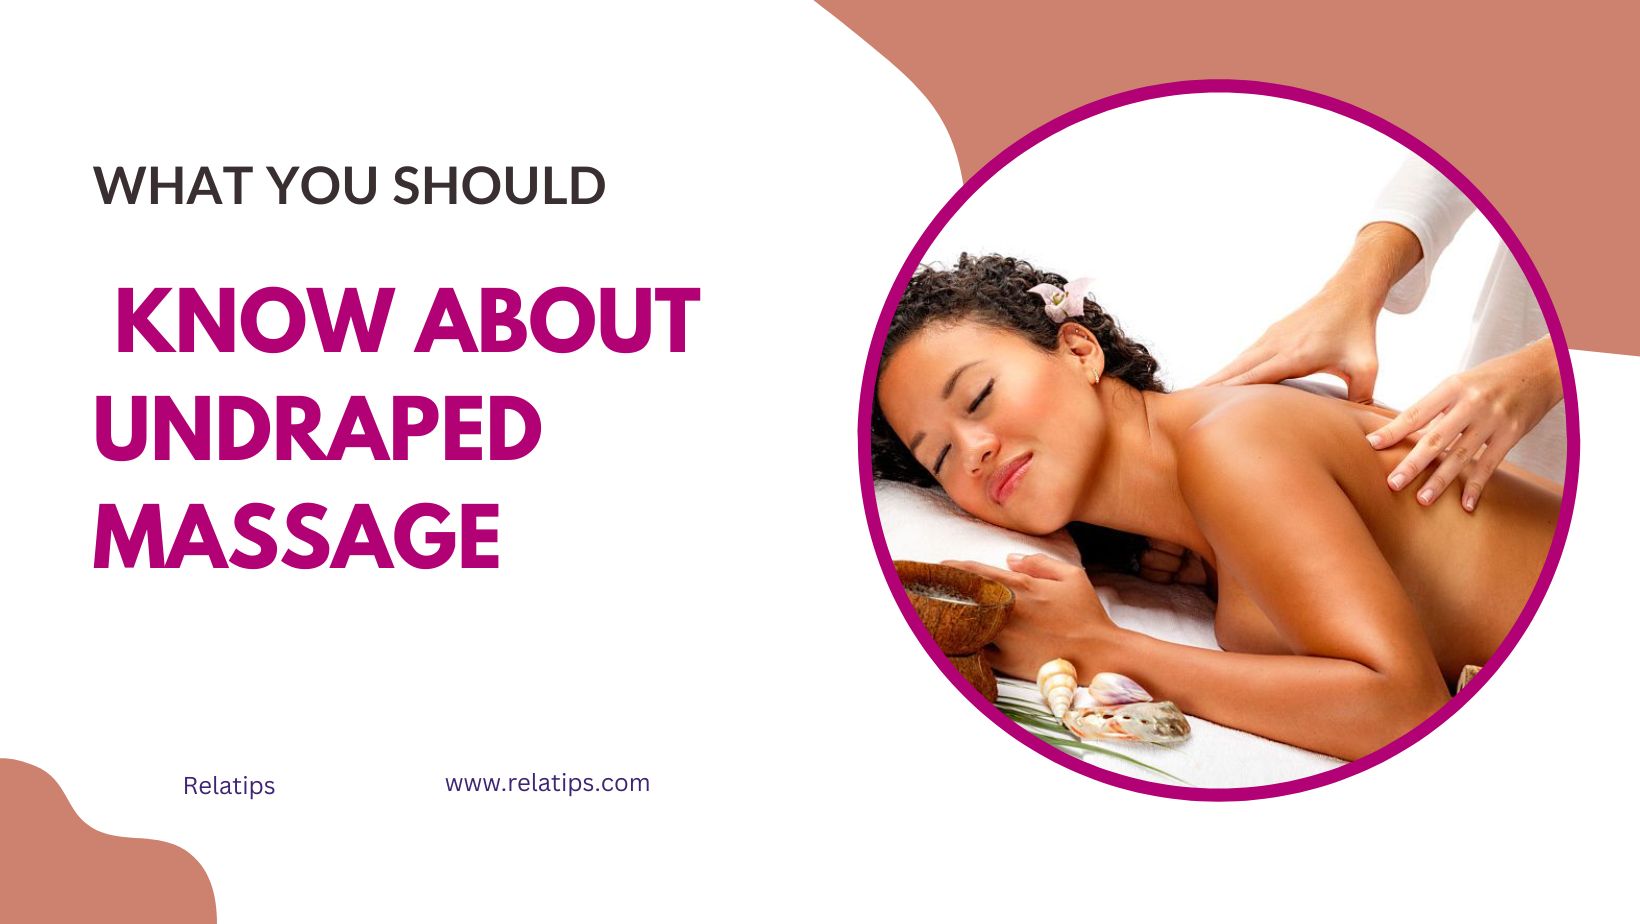 What You Should Know About Undraped Massage